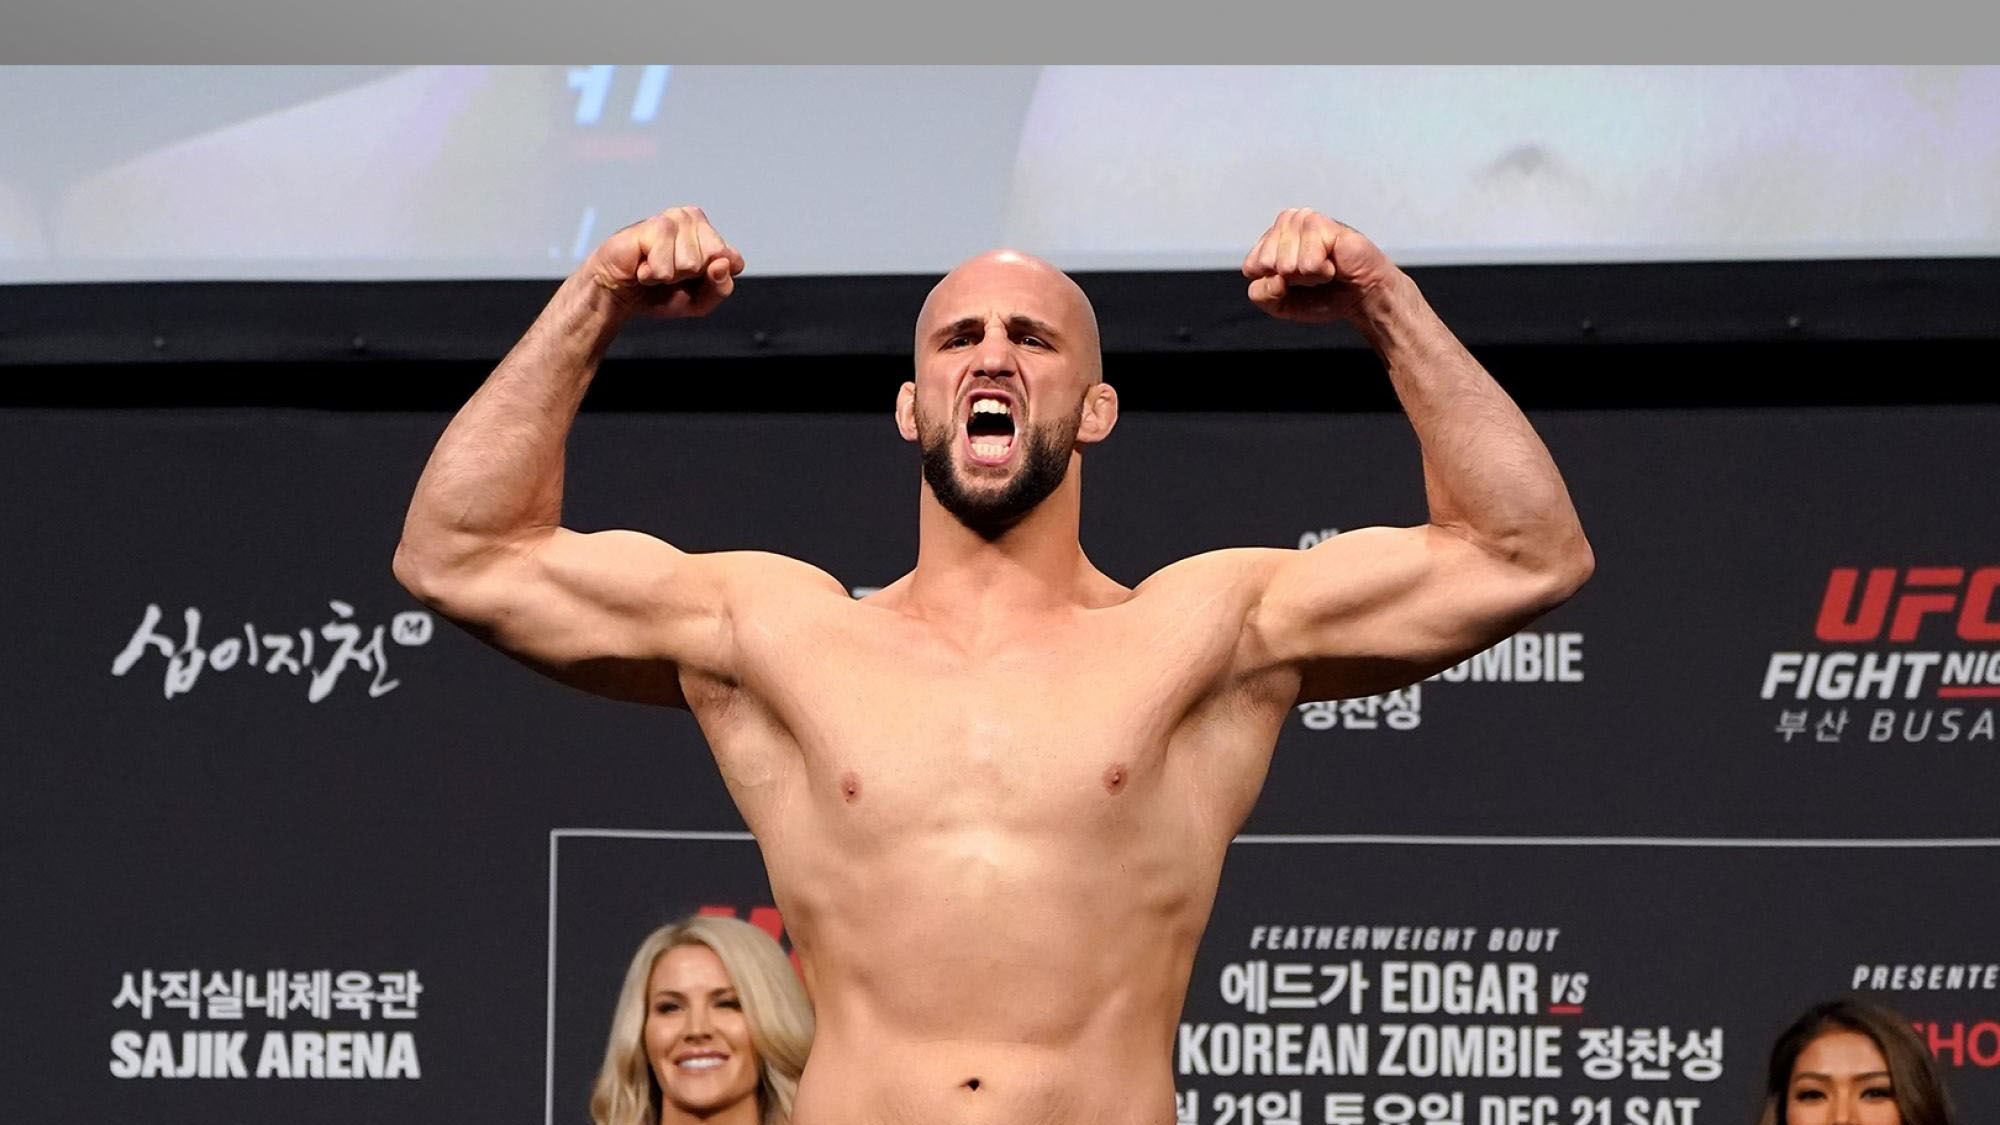 Volkan Oezdemir (born 19 September 1989) is a Swiss professional mixed martial artist and former kickboxing practitioner competing in the Light heavyw...